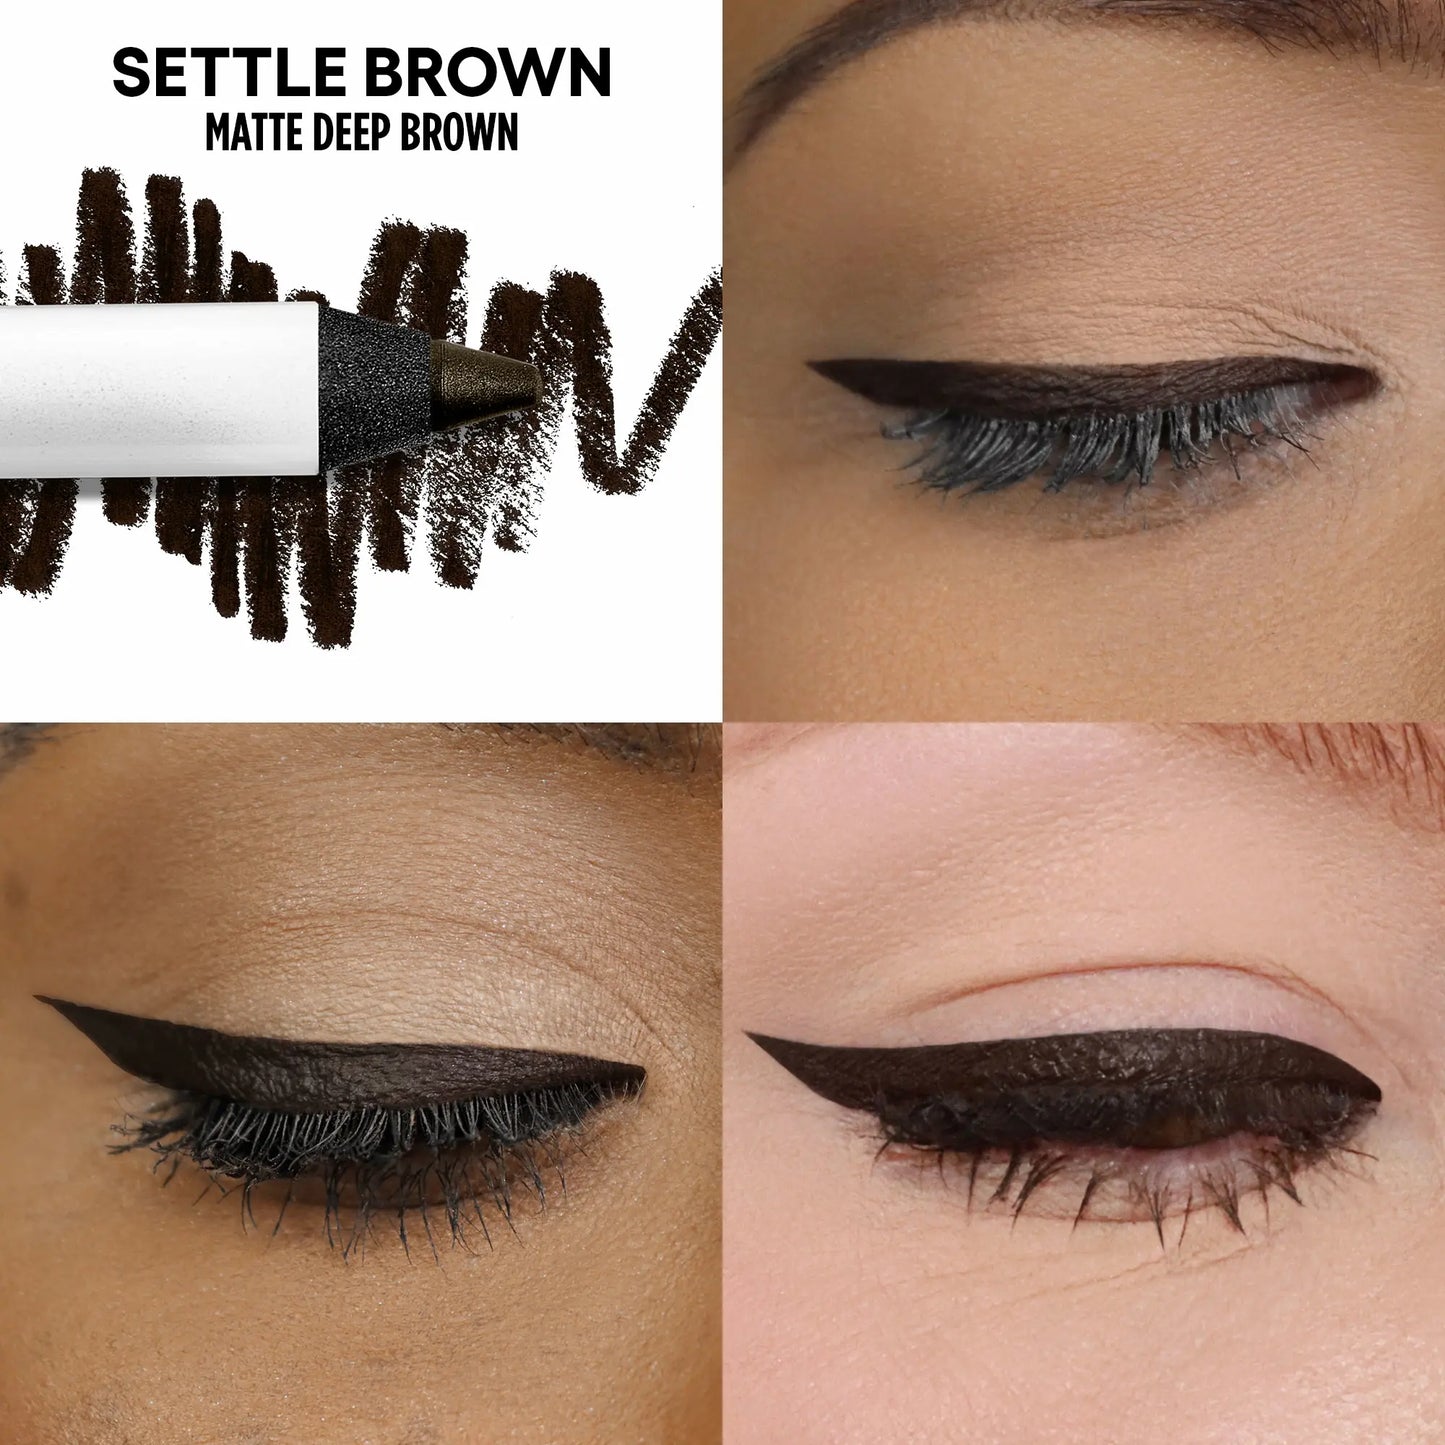 Settle Brown